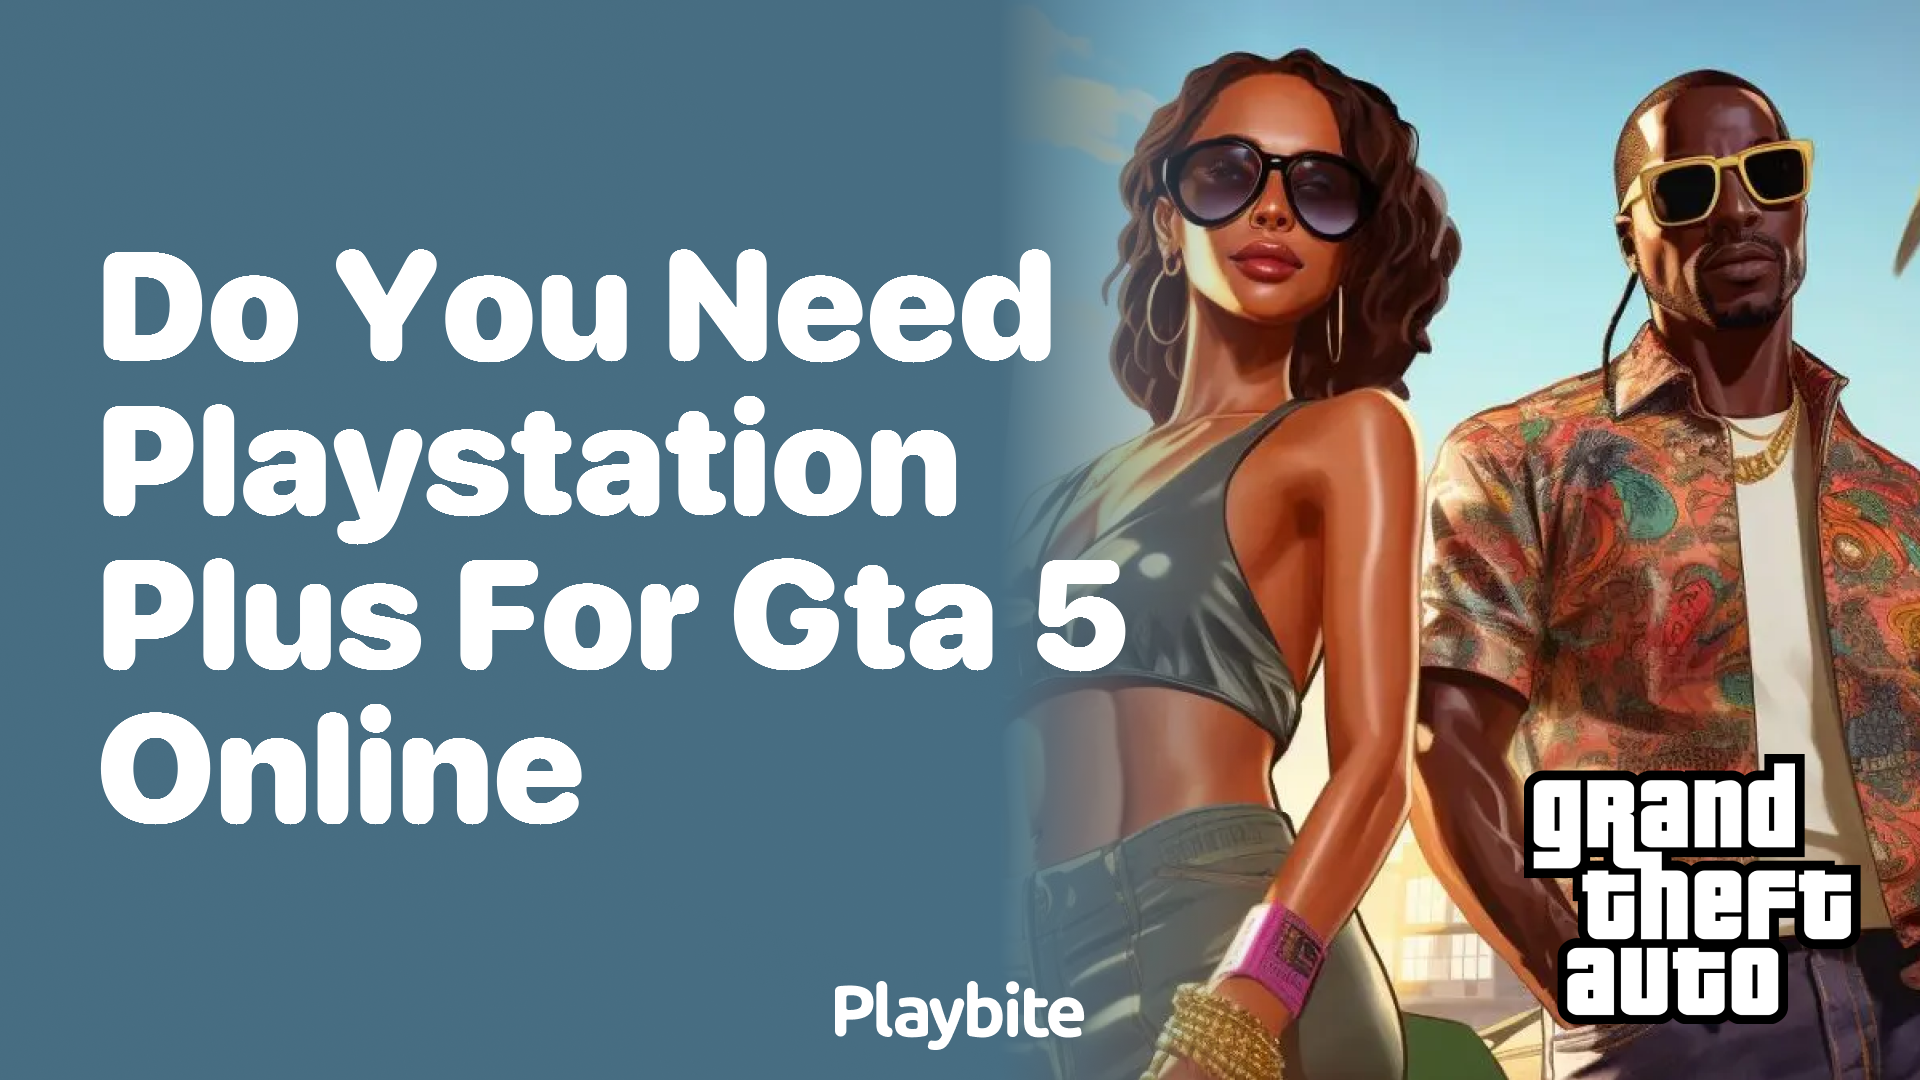 Do you need PlayStation Plus for GTA 5 Online?